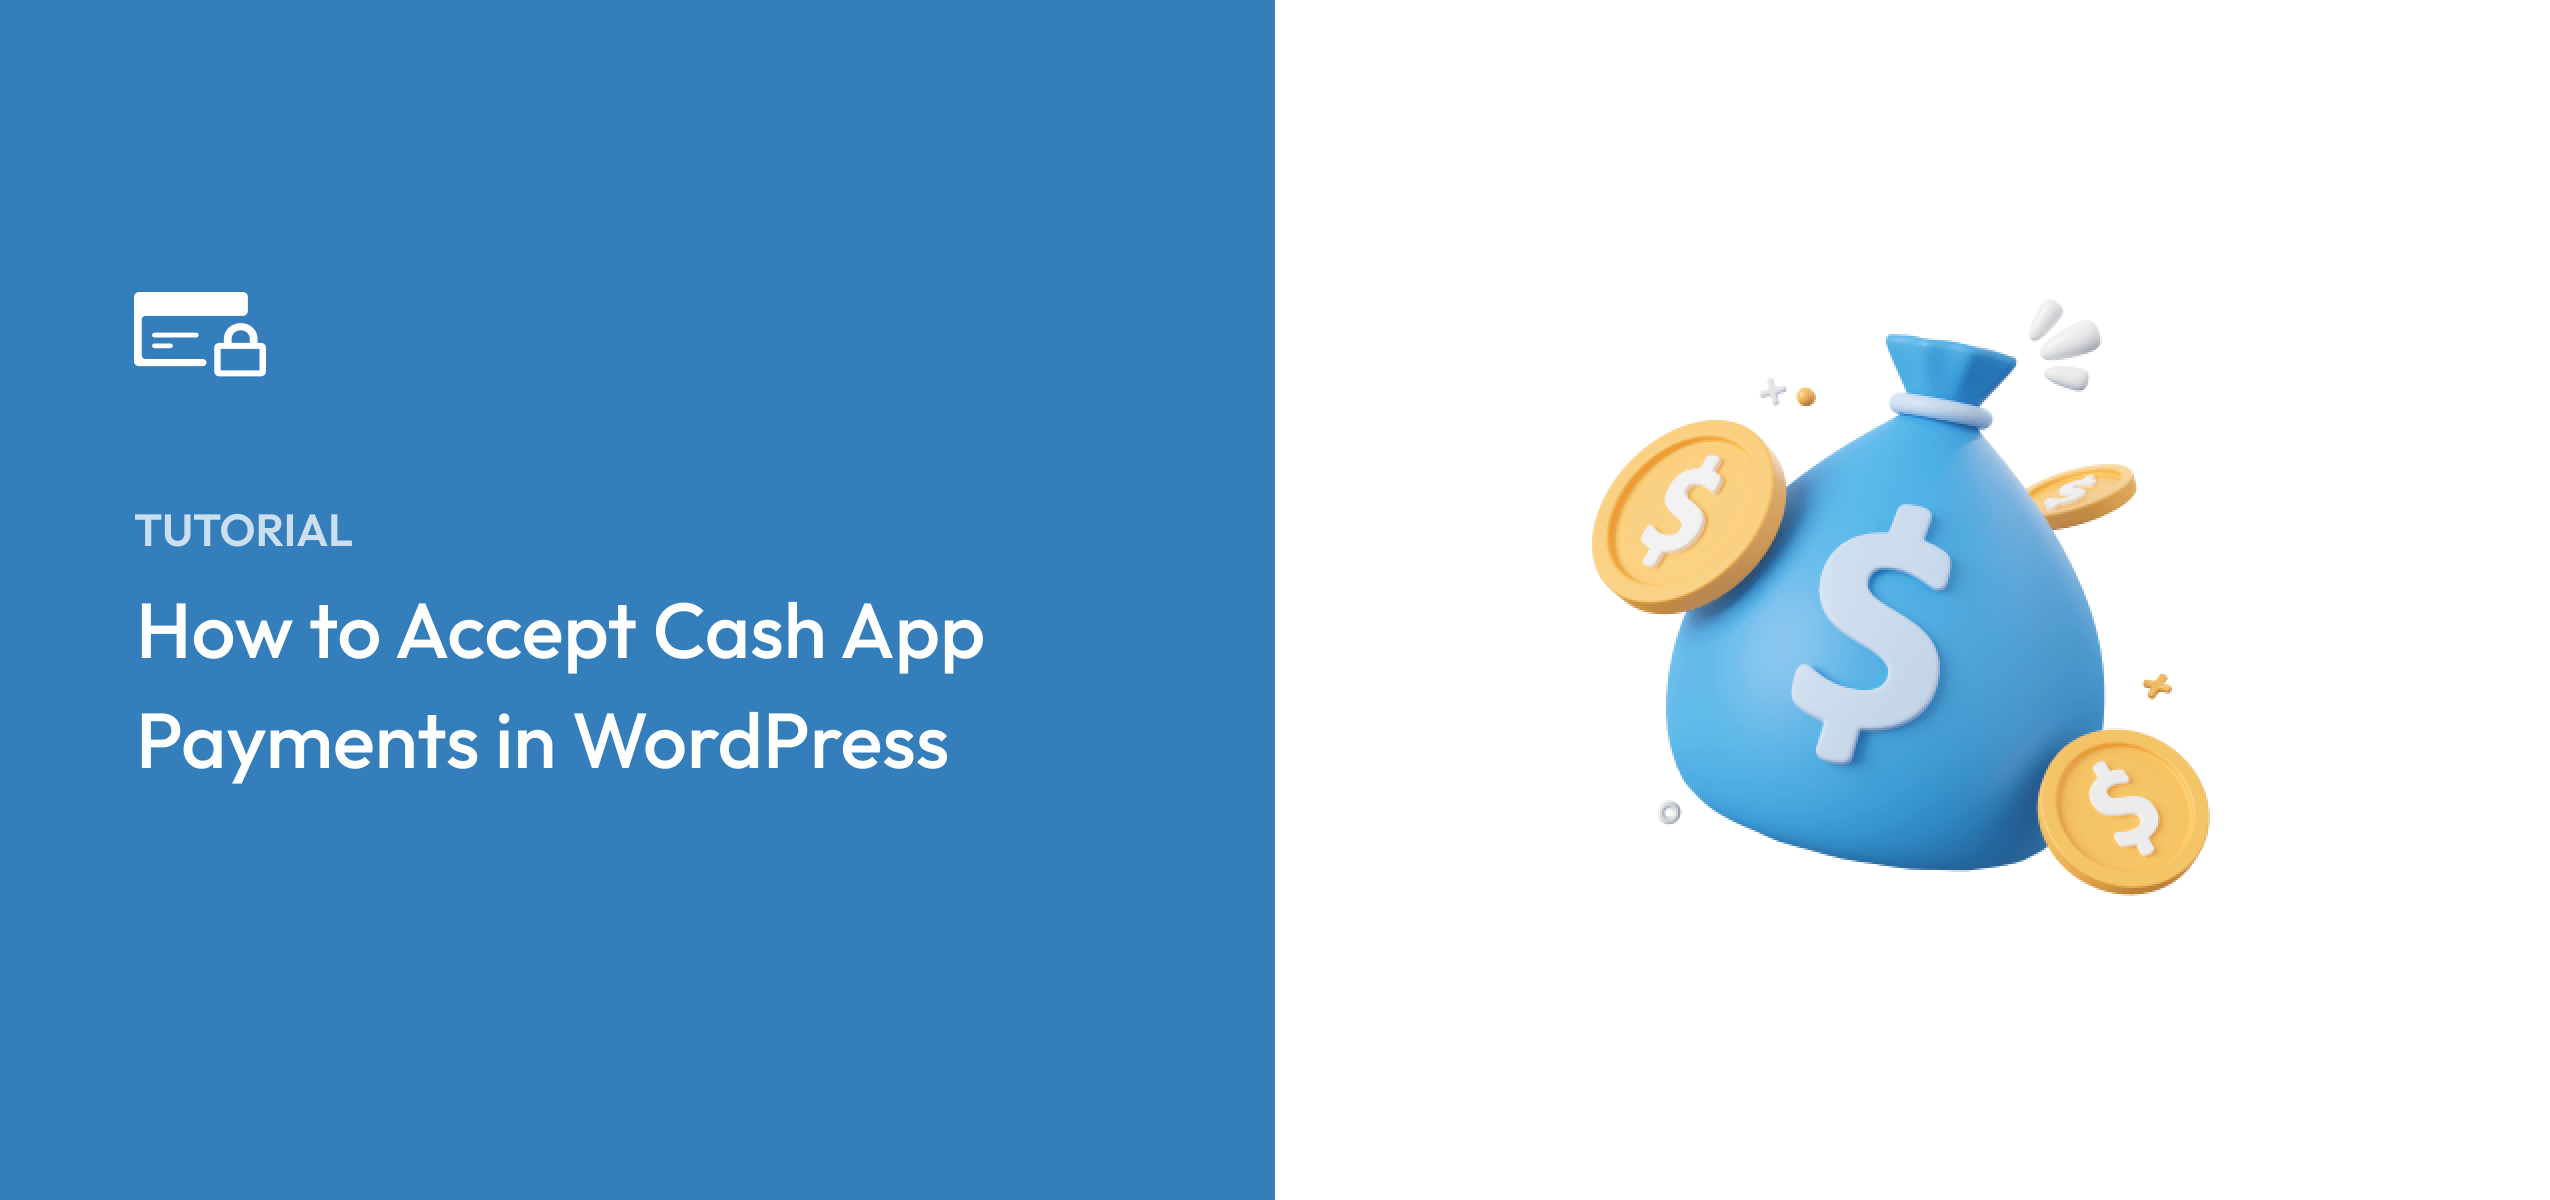 How to Accept Cash App Payments in WordPress